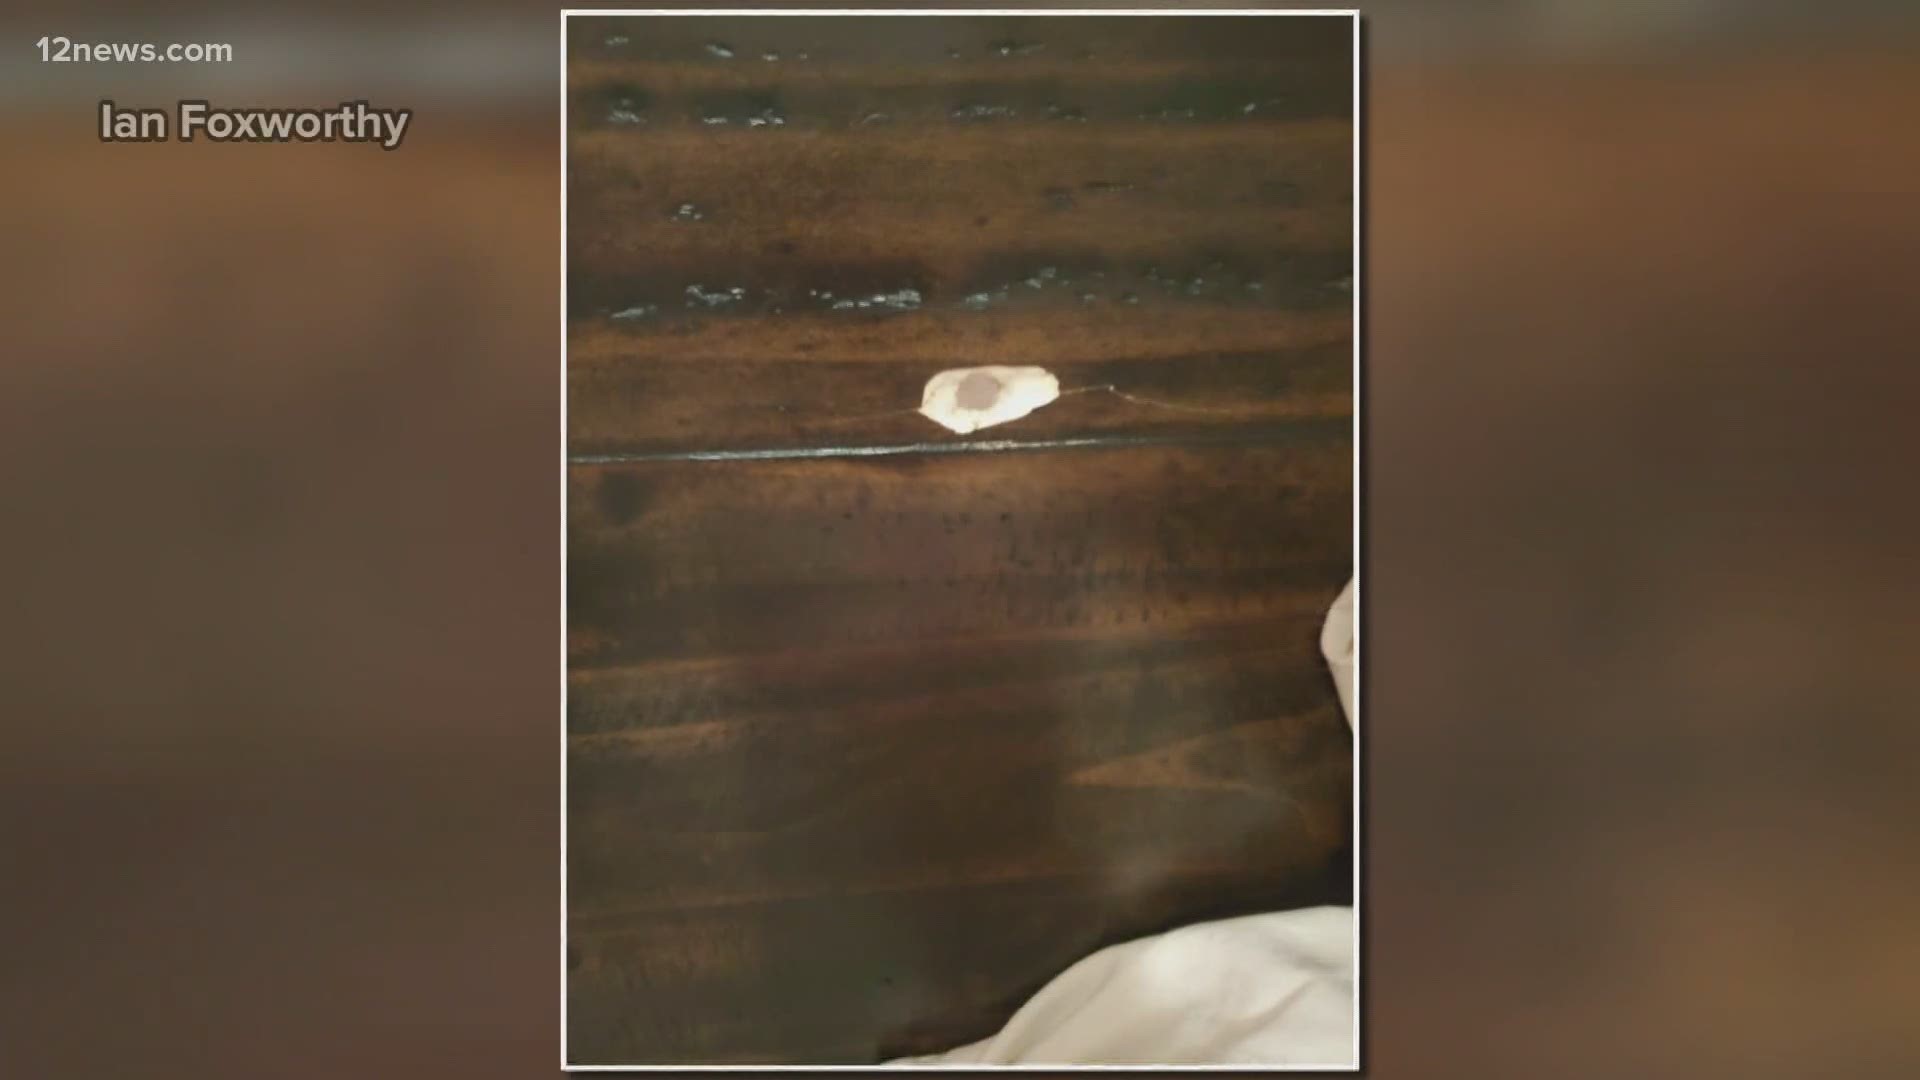 Ian Foxworthy said he and his partner and their dog were all in their bed at the time when the bullet hit the headboard and ricocheted around the room.